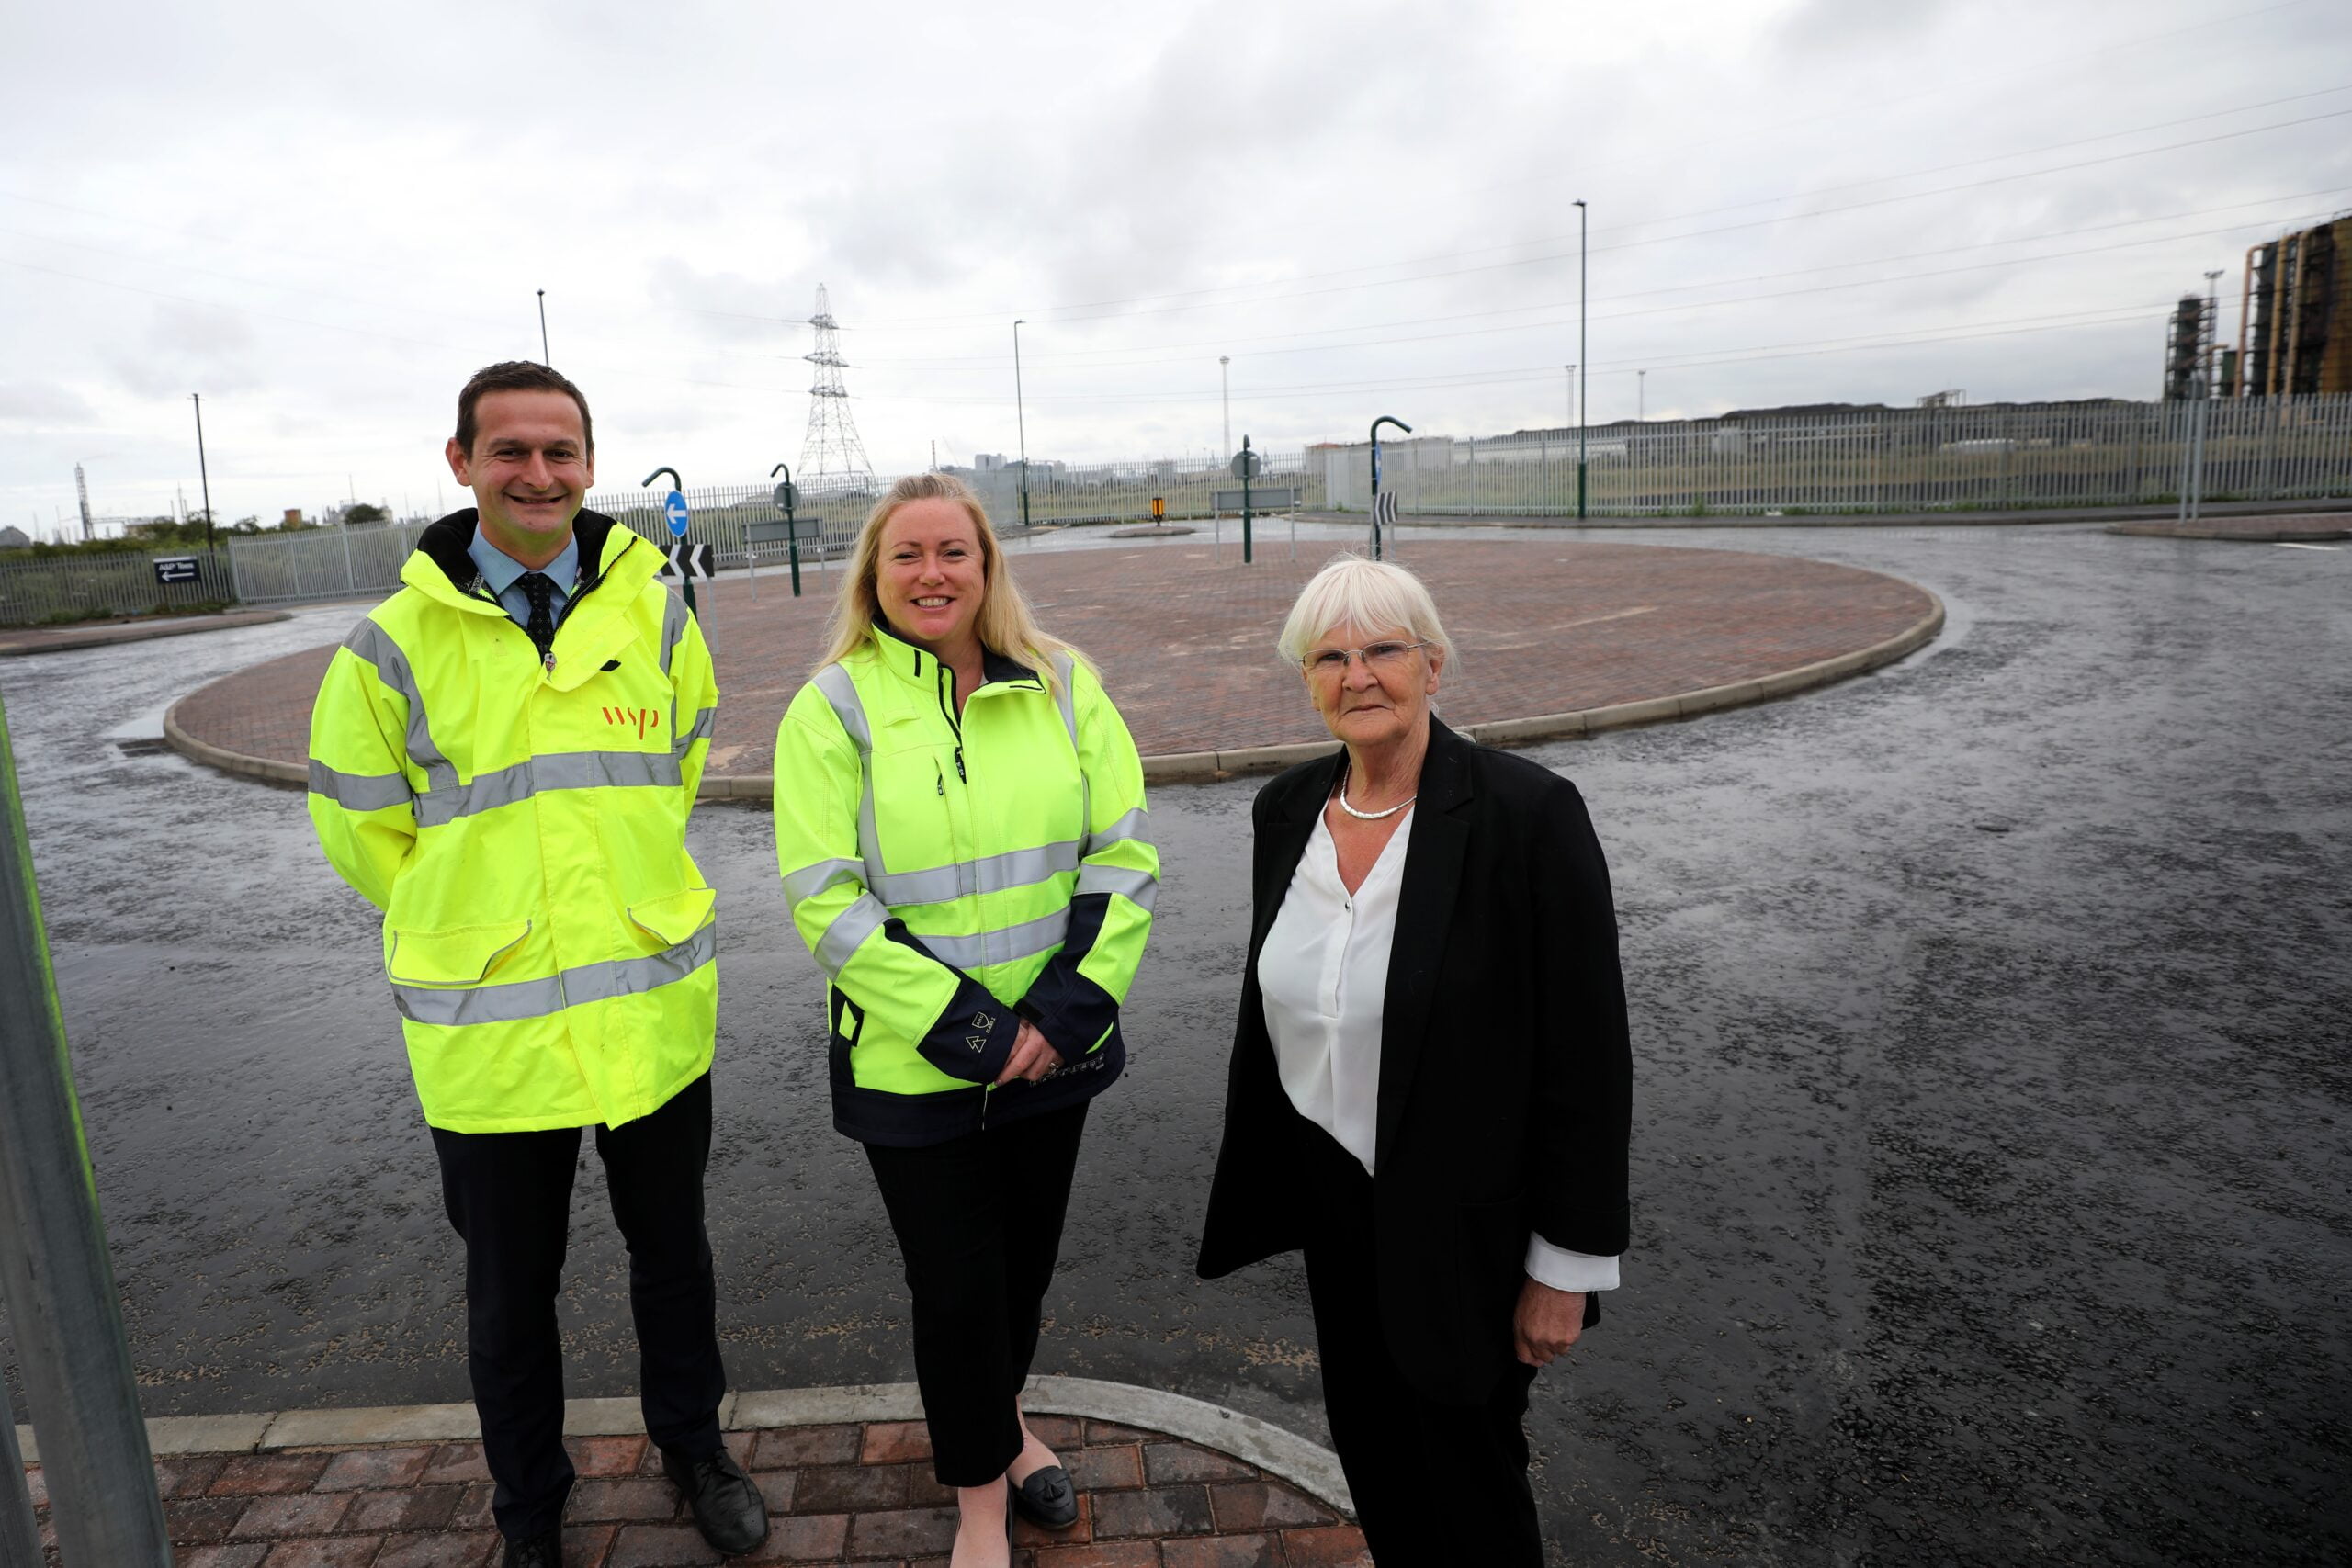 Cllr Lanigan at the new roundabout | Tees Valley Combined Authority